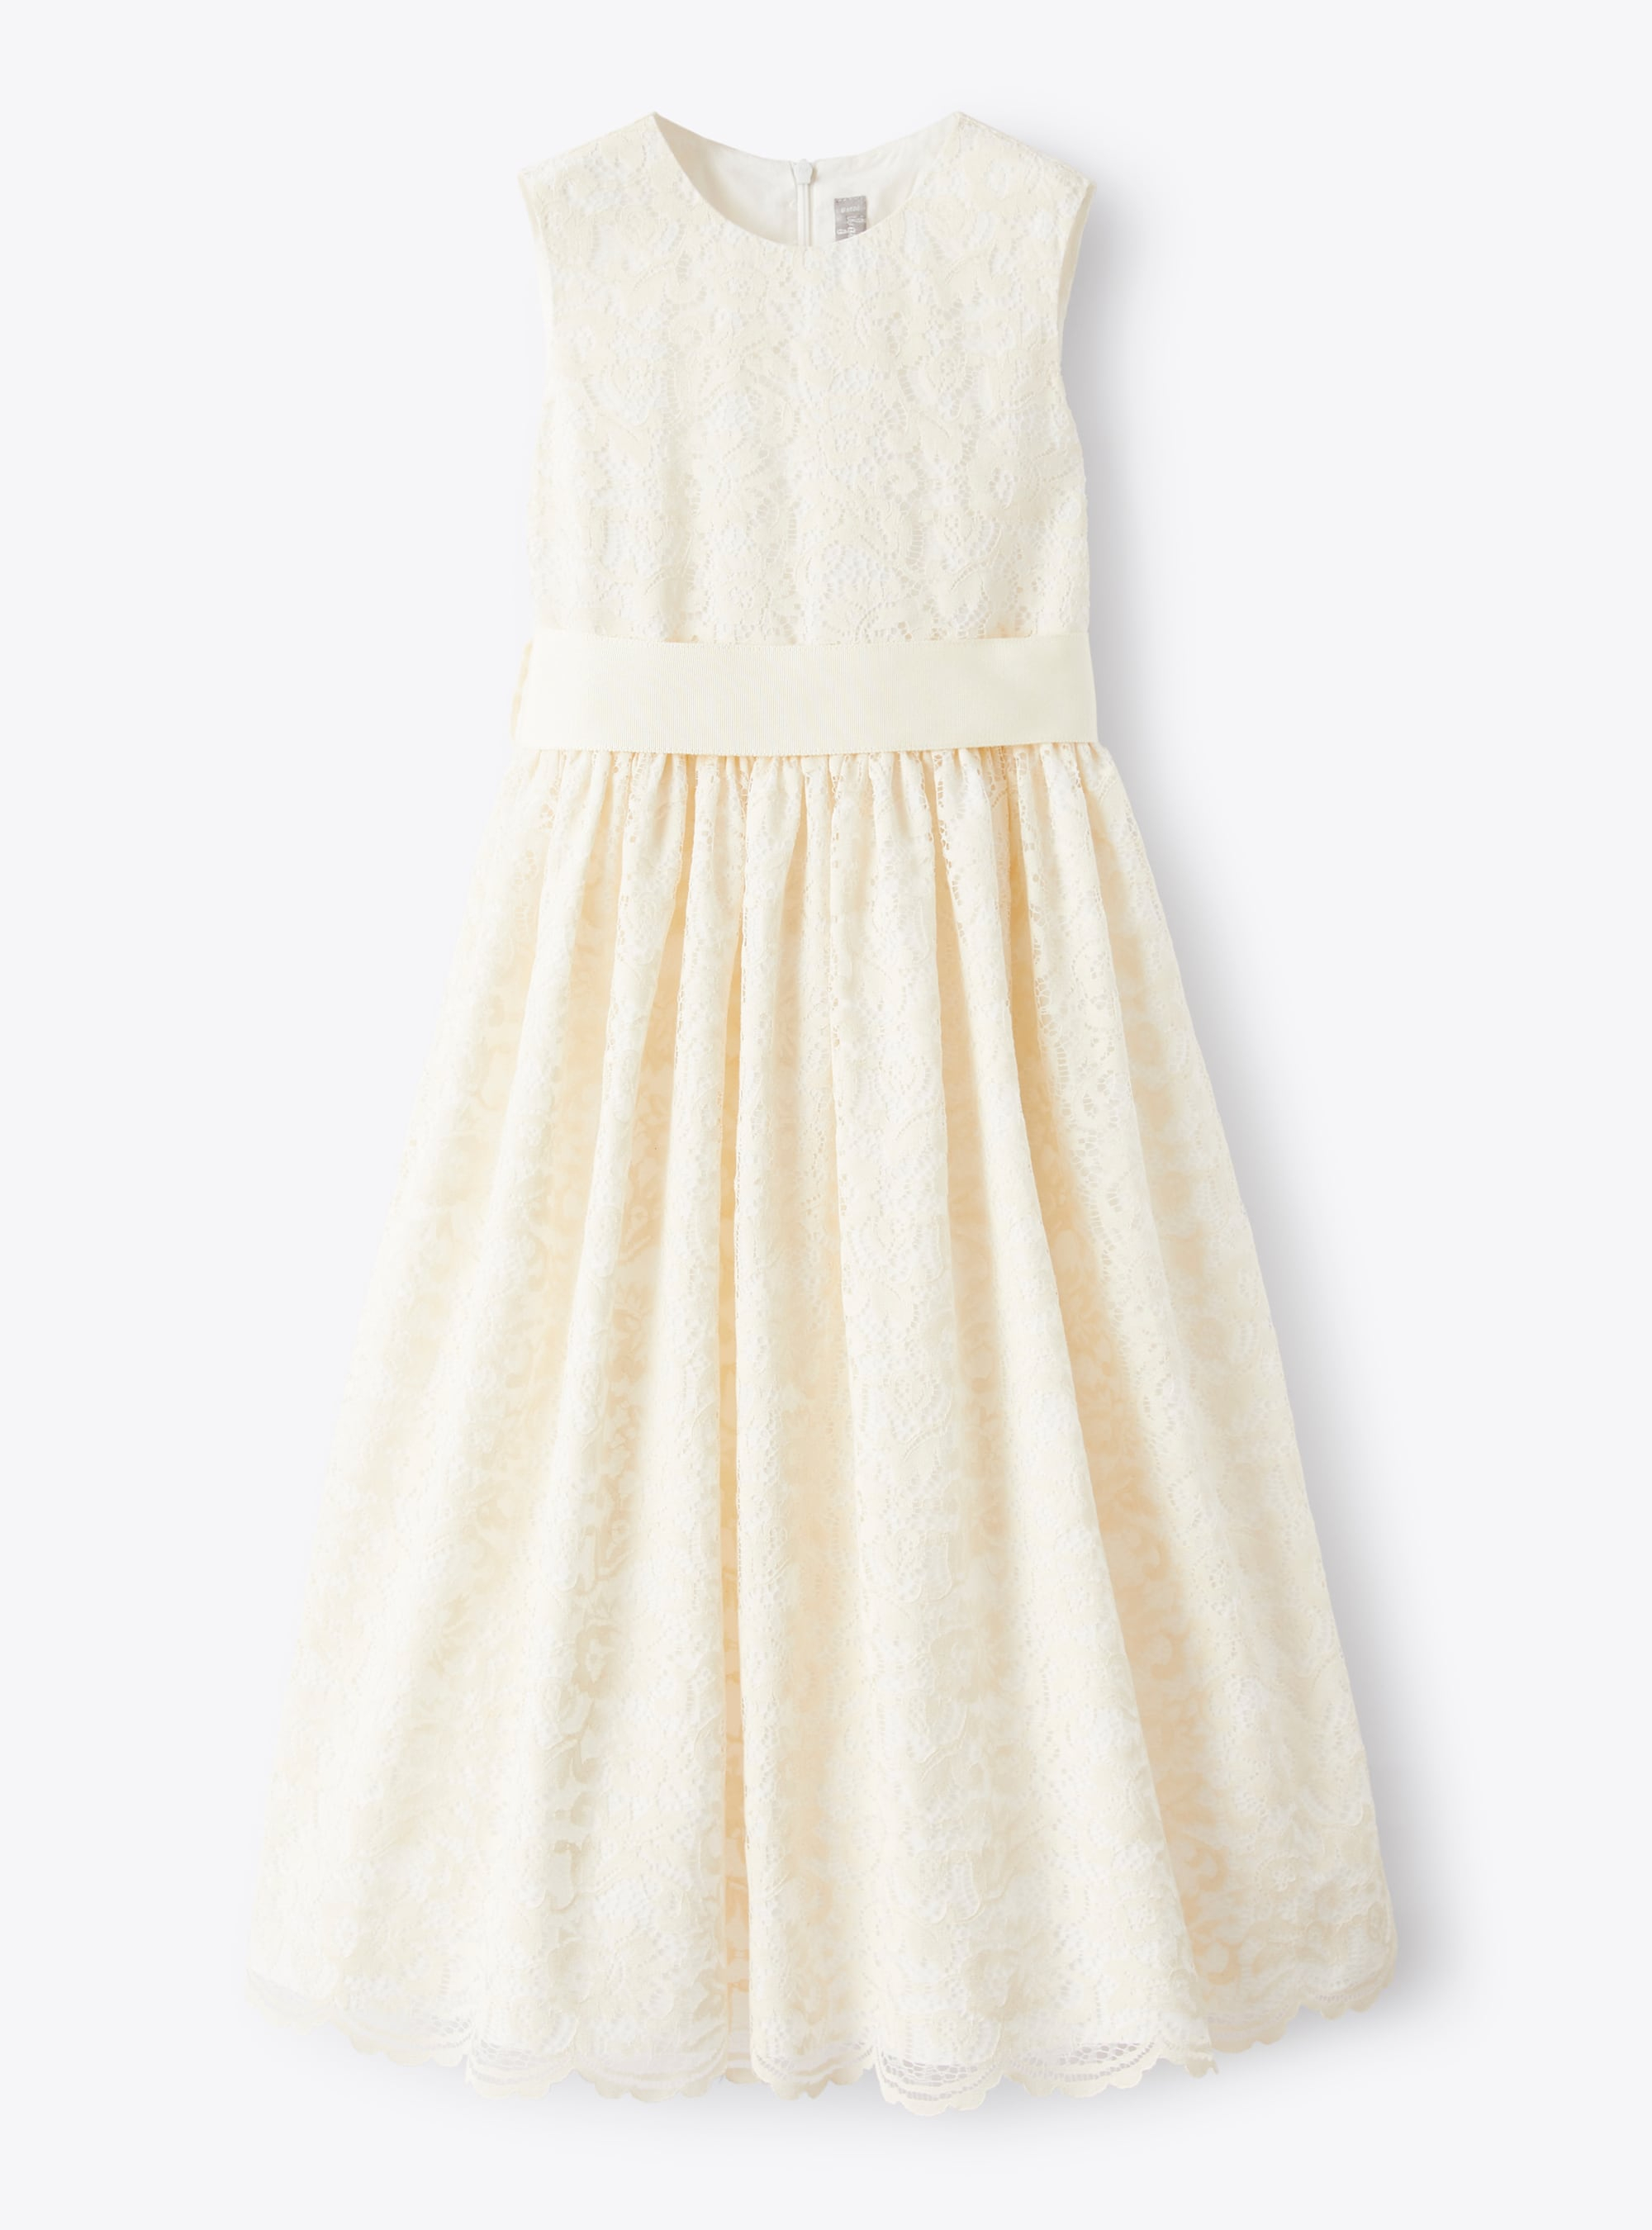 Sleeveless dress in lace with belt - White | Il Gufo